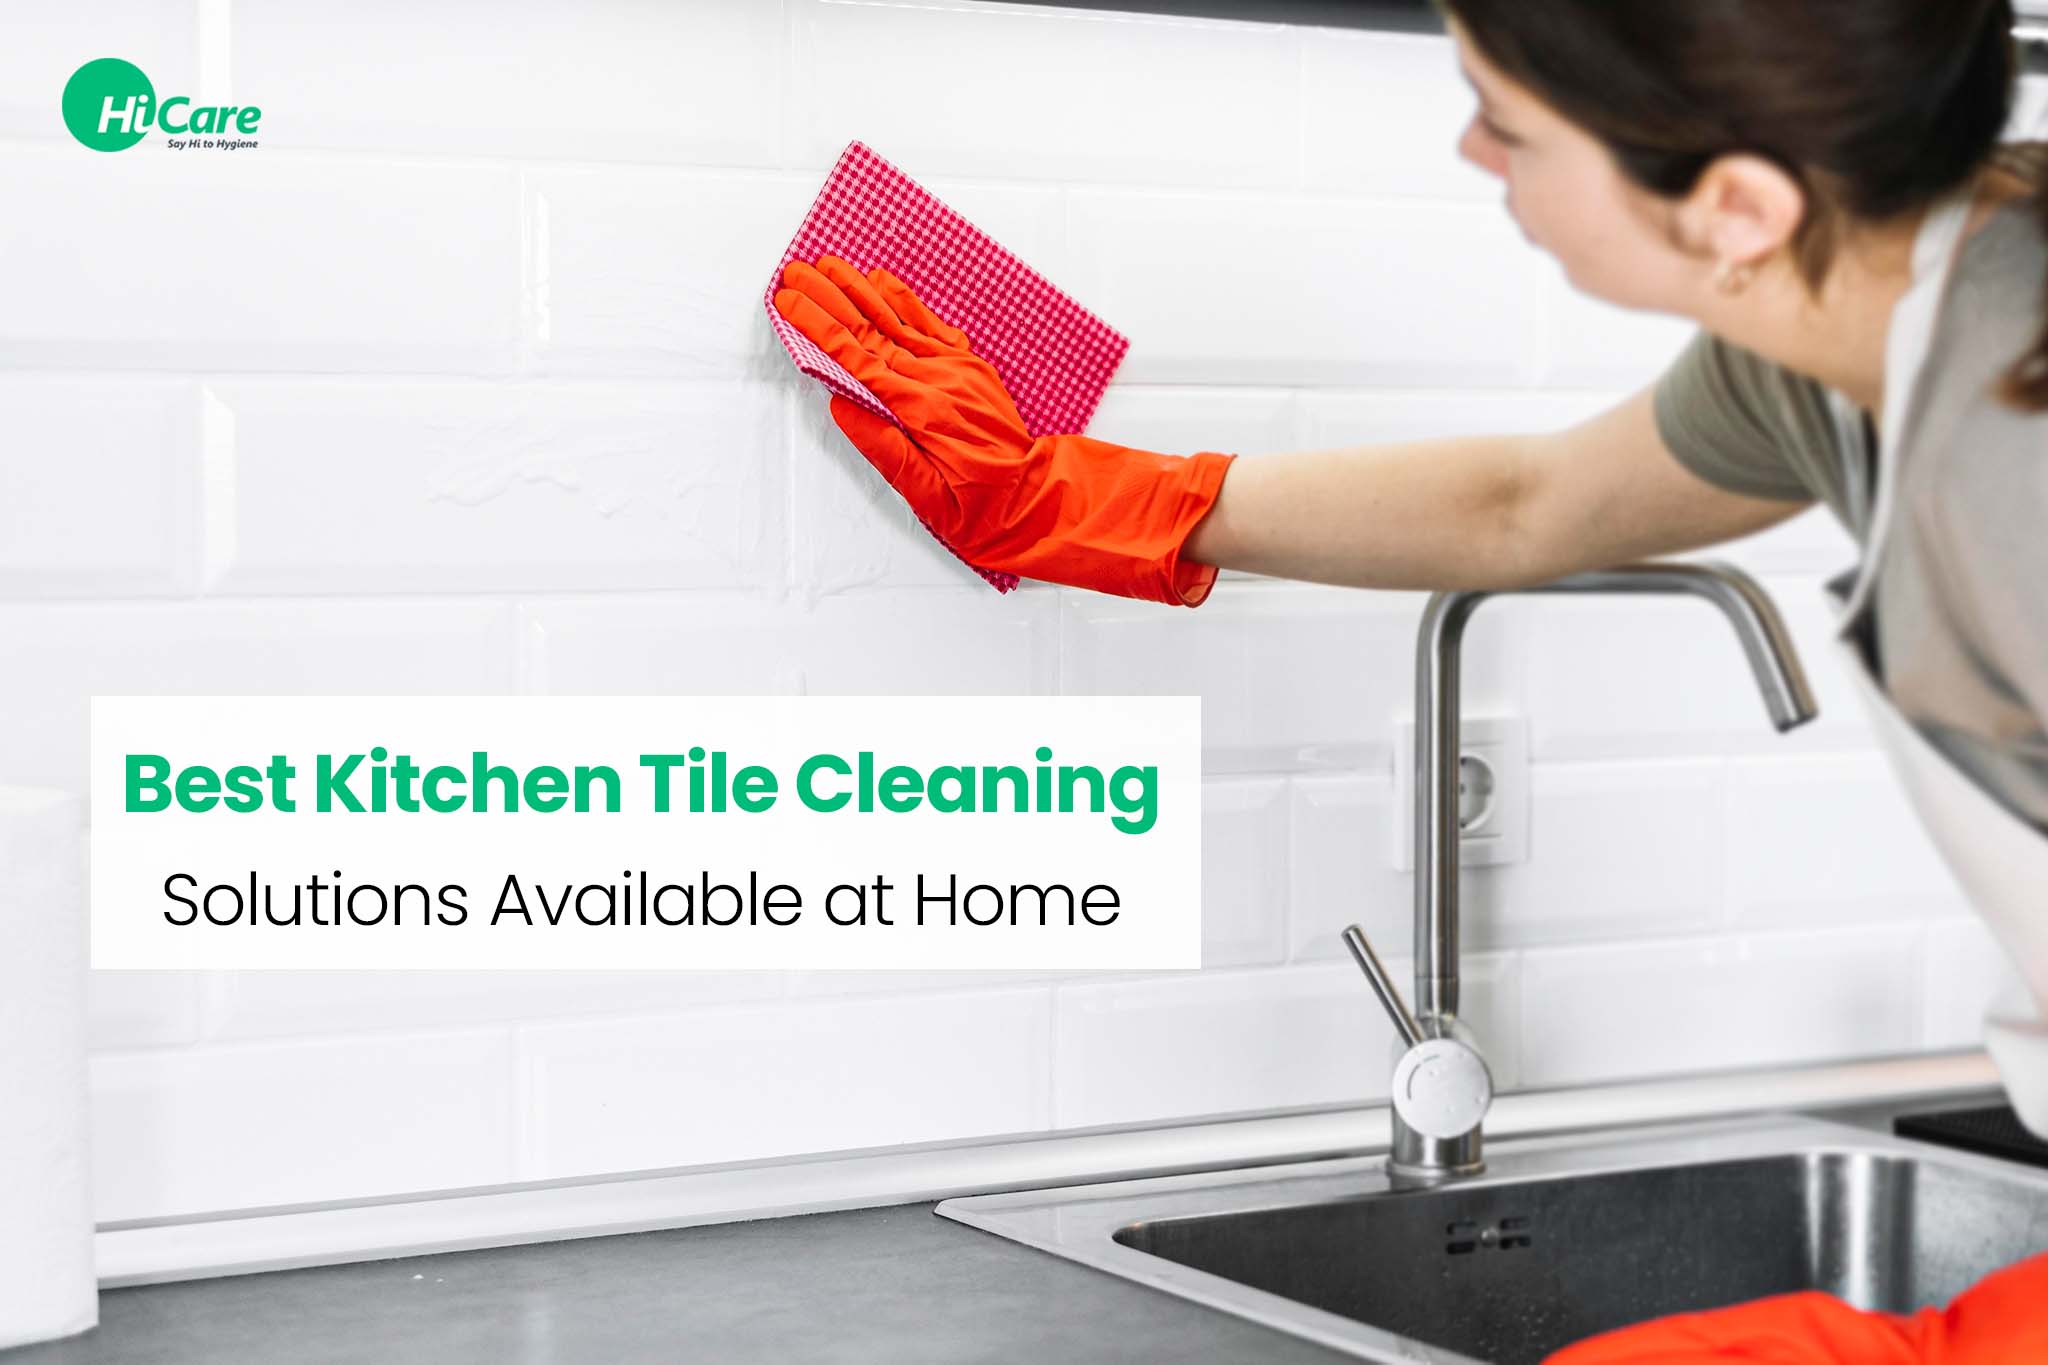 The quickest way to clean kitchen tiles